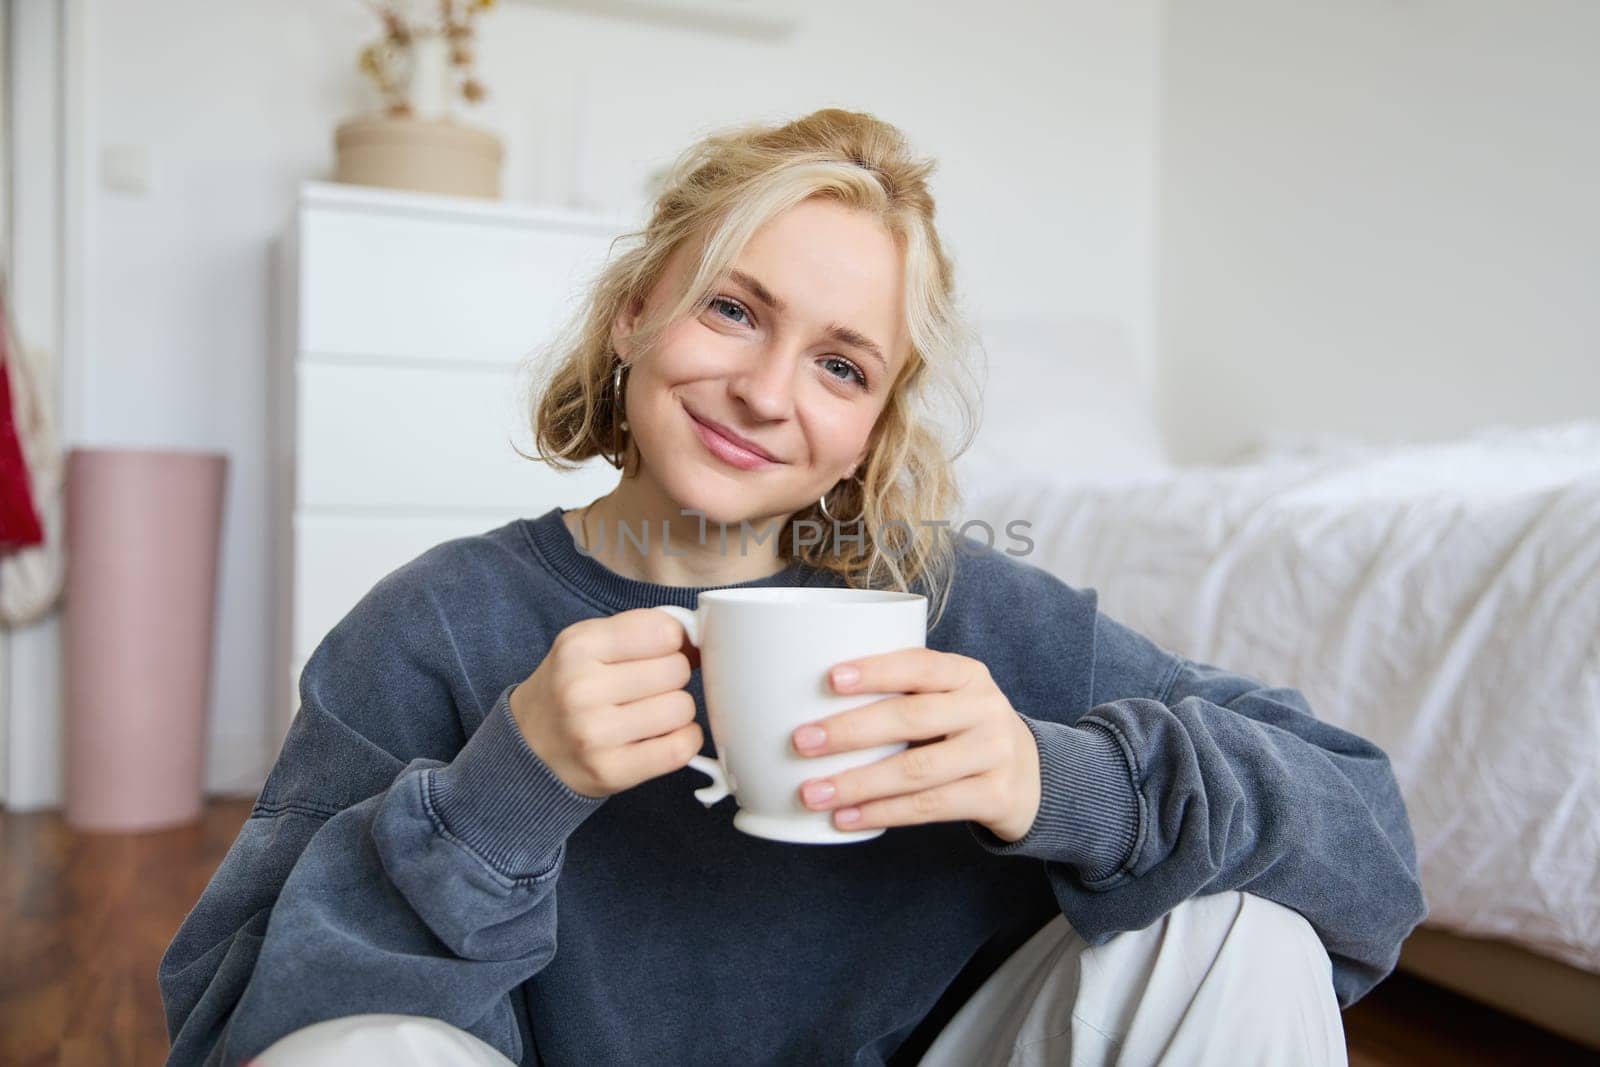 Image of young teenage girl sitting in her bedroom on floor, drinking cup of tea and enjoying day at home, smiling and looking at camera.